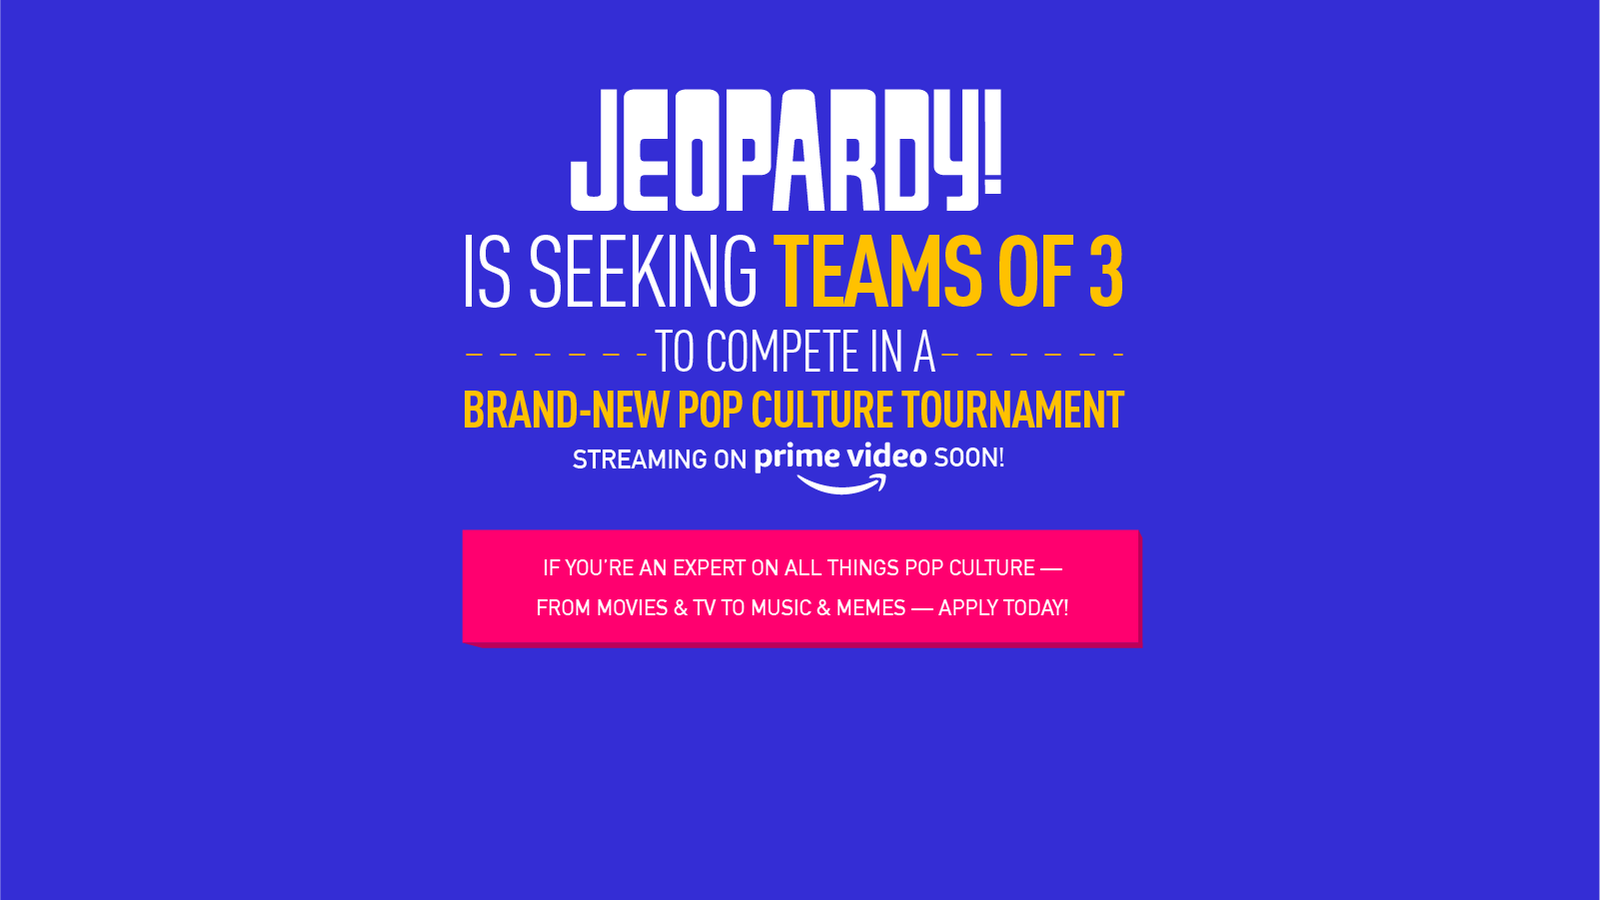 Jeopardy! is seeking teams of 3 to compete in a brand-new pop culture tournament